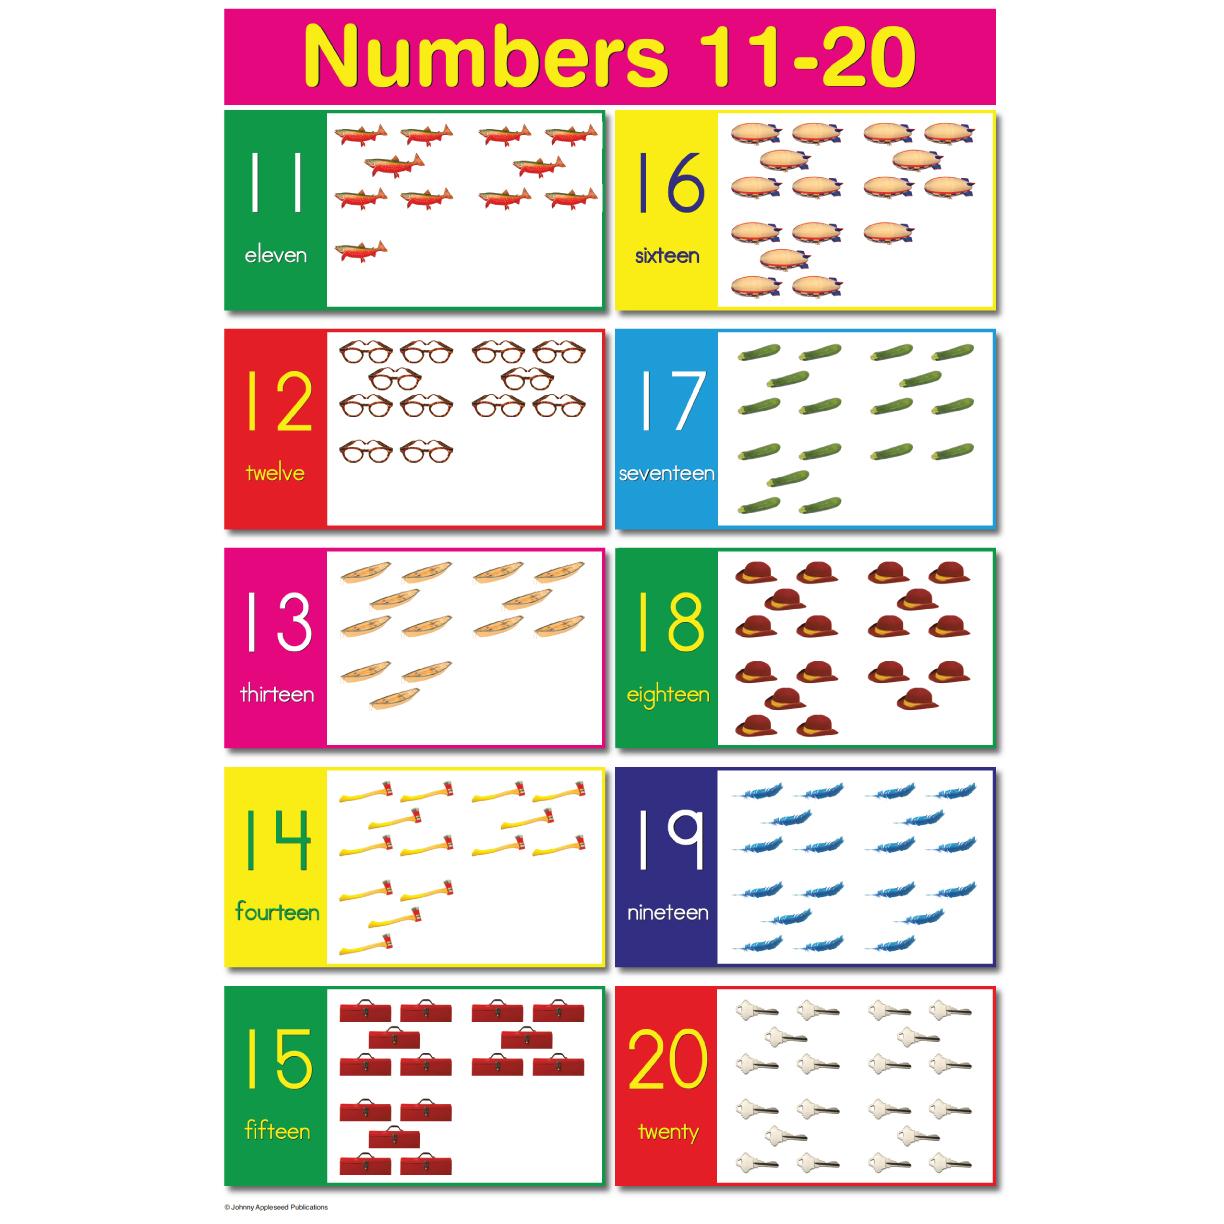 numbers-11-20-educational-laminated-chart